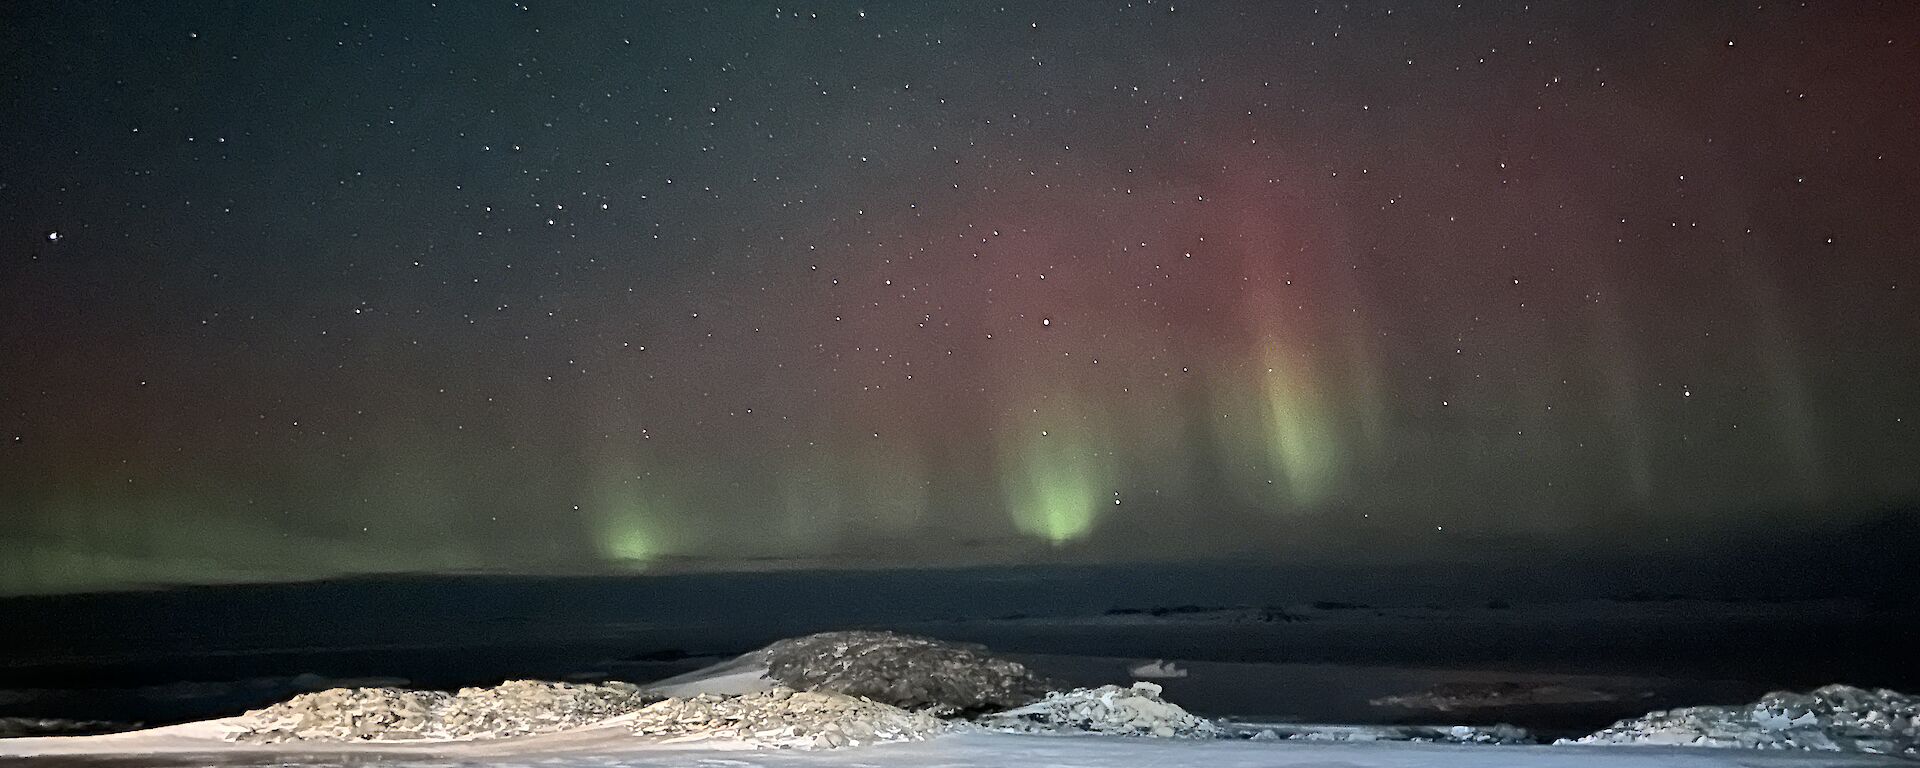 The foreground of this photo is a lightly snow covered rocky piece of ground. It is night time and the sky in the background is full of stars. There are tall vertical beams of light that are green at the base, transitioning into red at the tops. They vary in height, with the tallest filling the middle third of the picture.